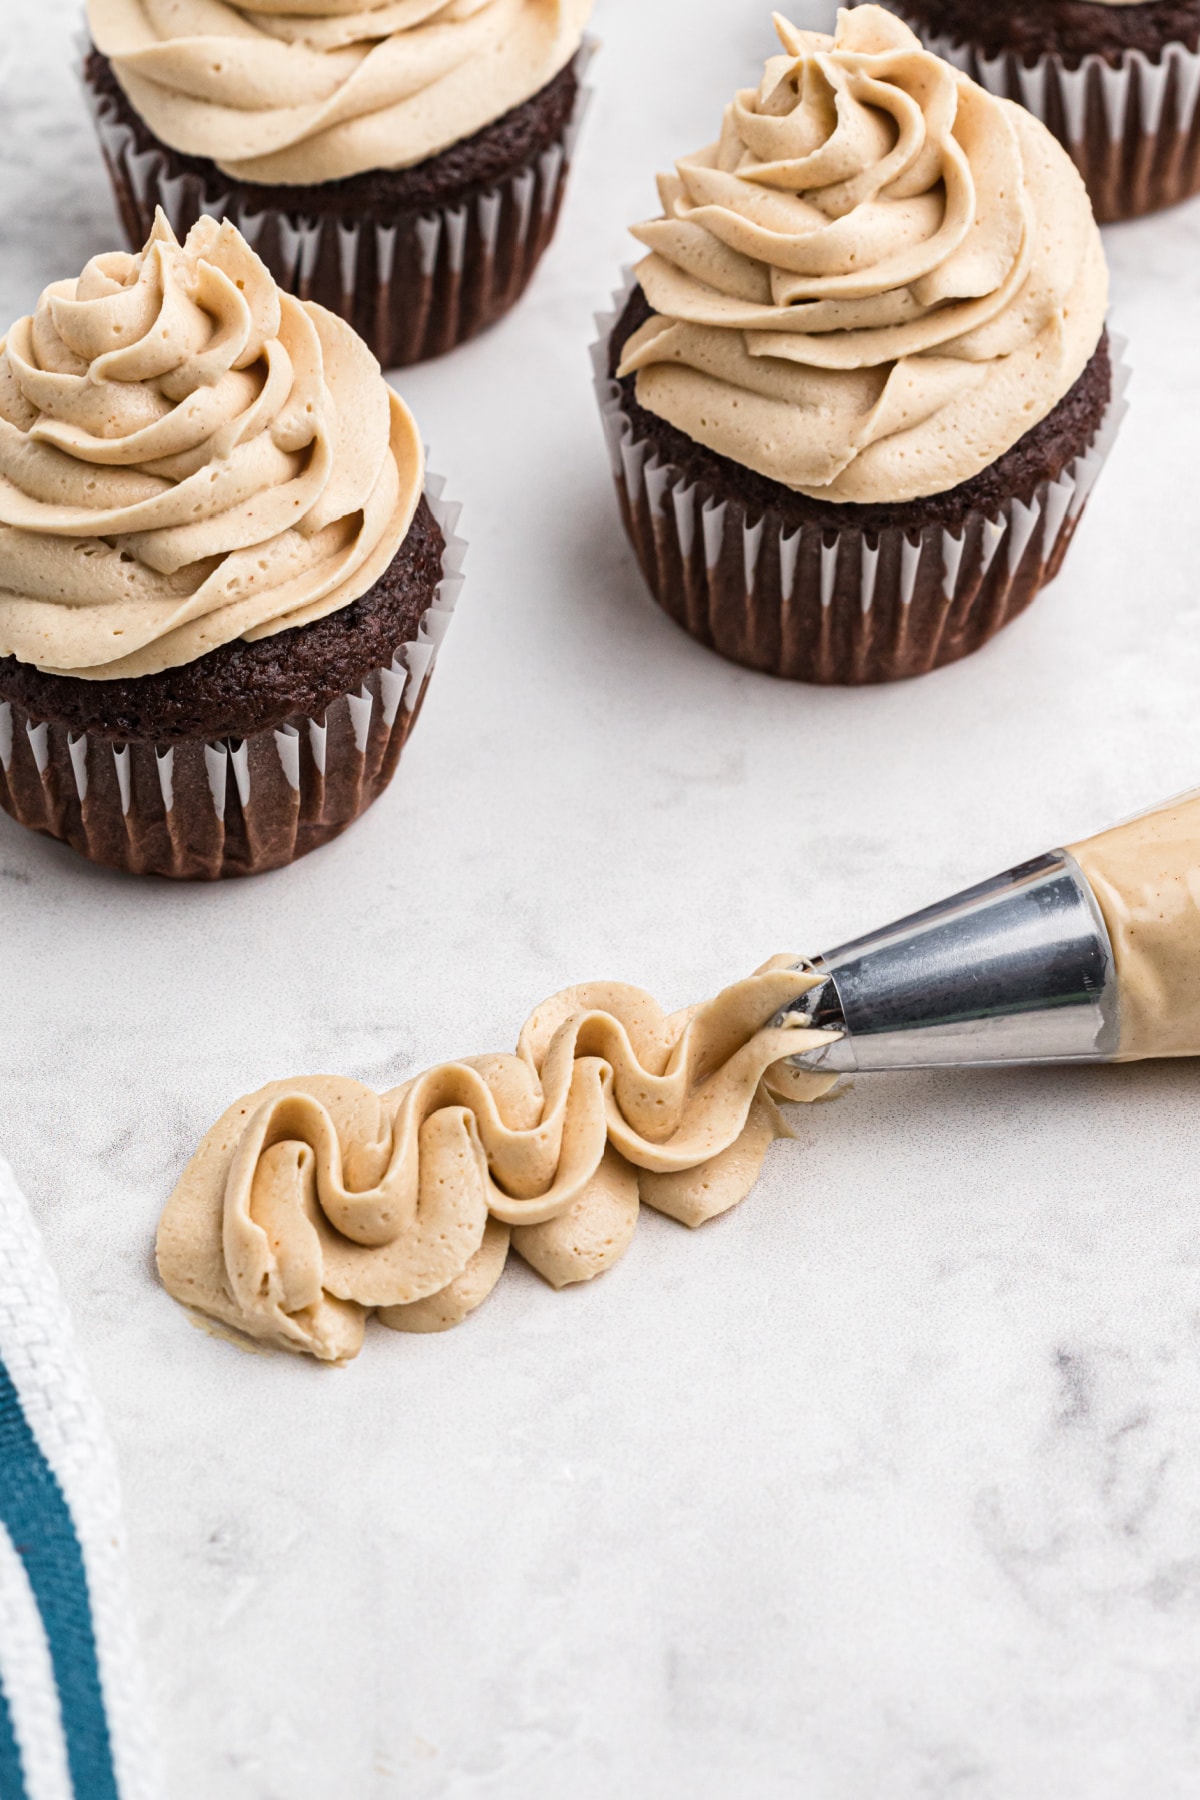 Piping peanut butter frosting